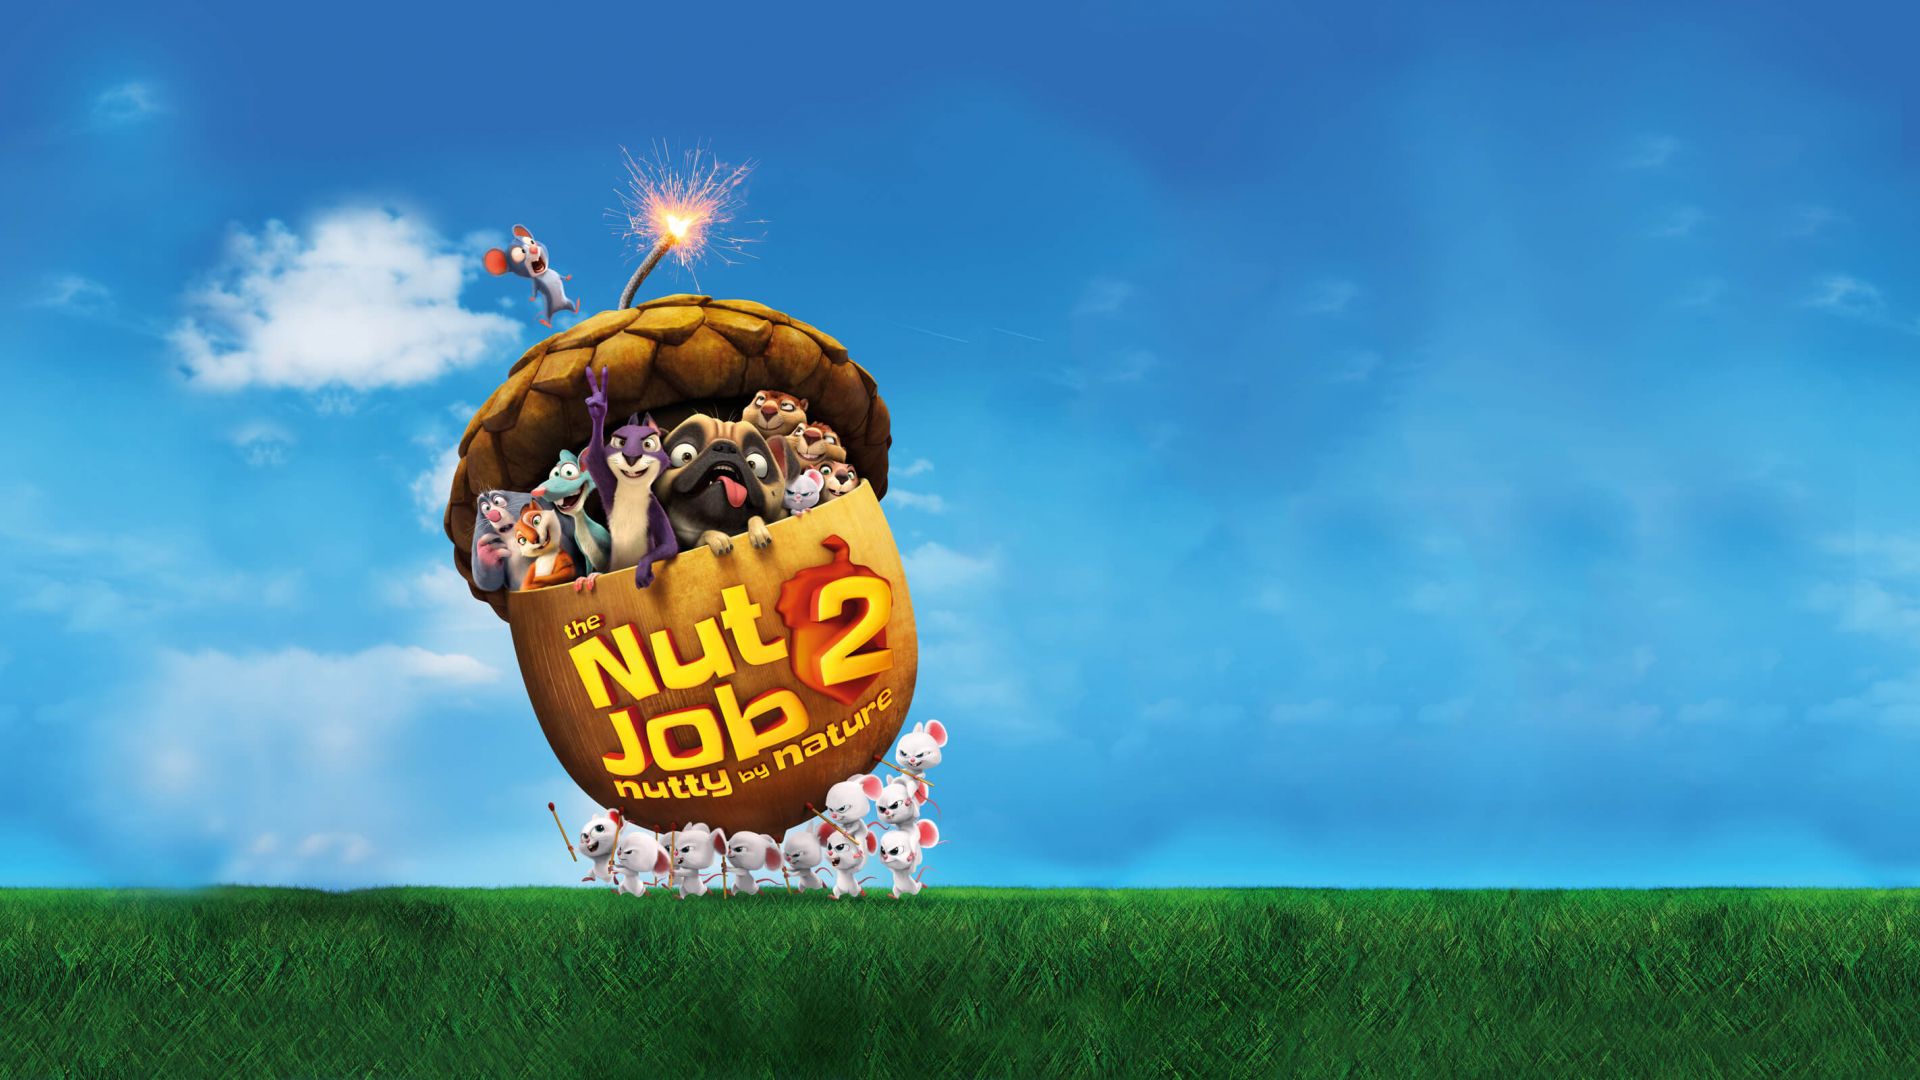 Desktop Wallpaper The Nut Job 2: Nutty By Nature, Animation Movie, Movie, Hd  Image, Picture, Background, E9ed5f